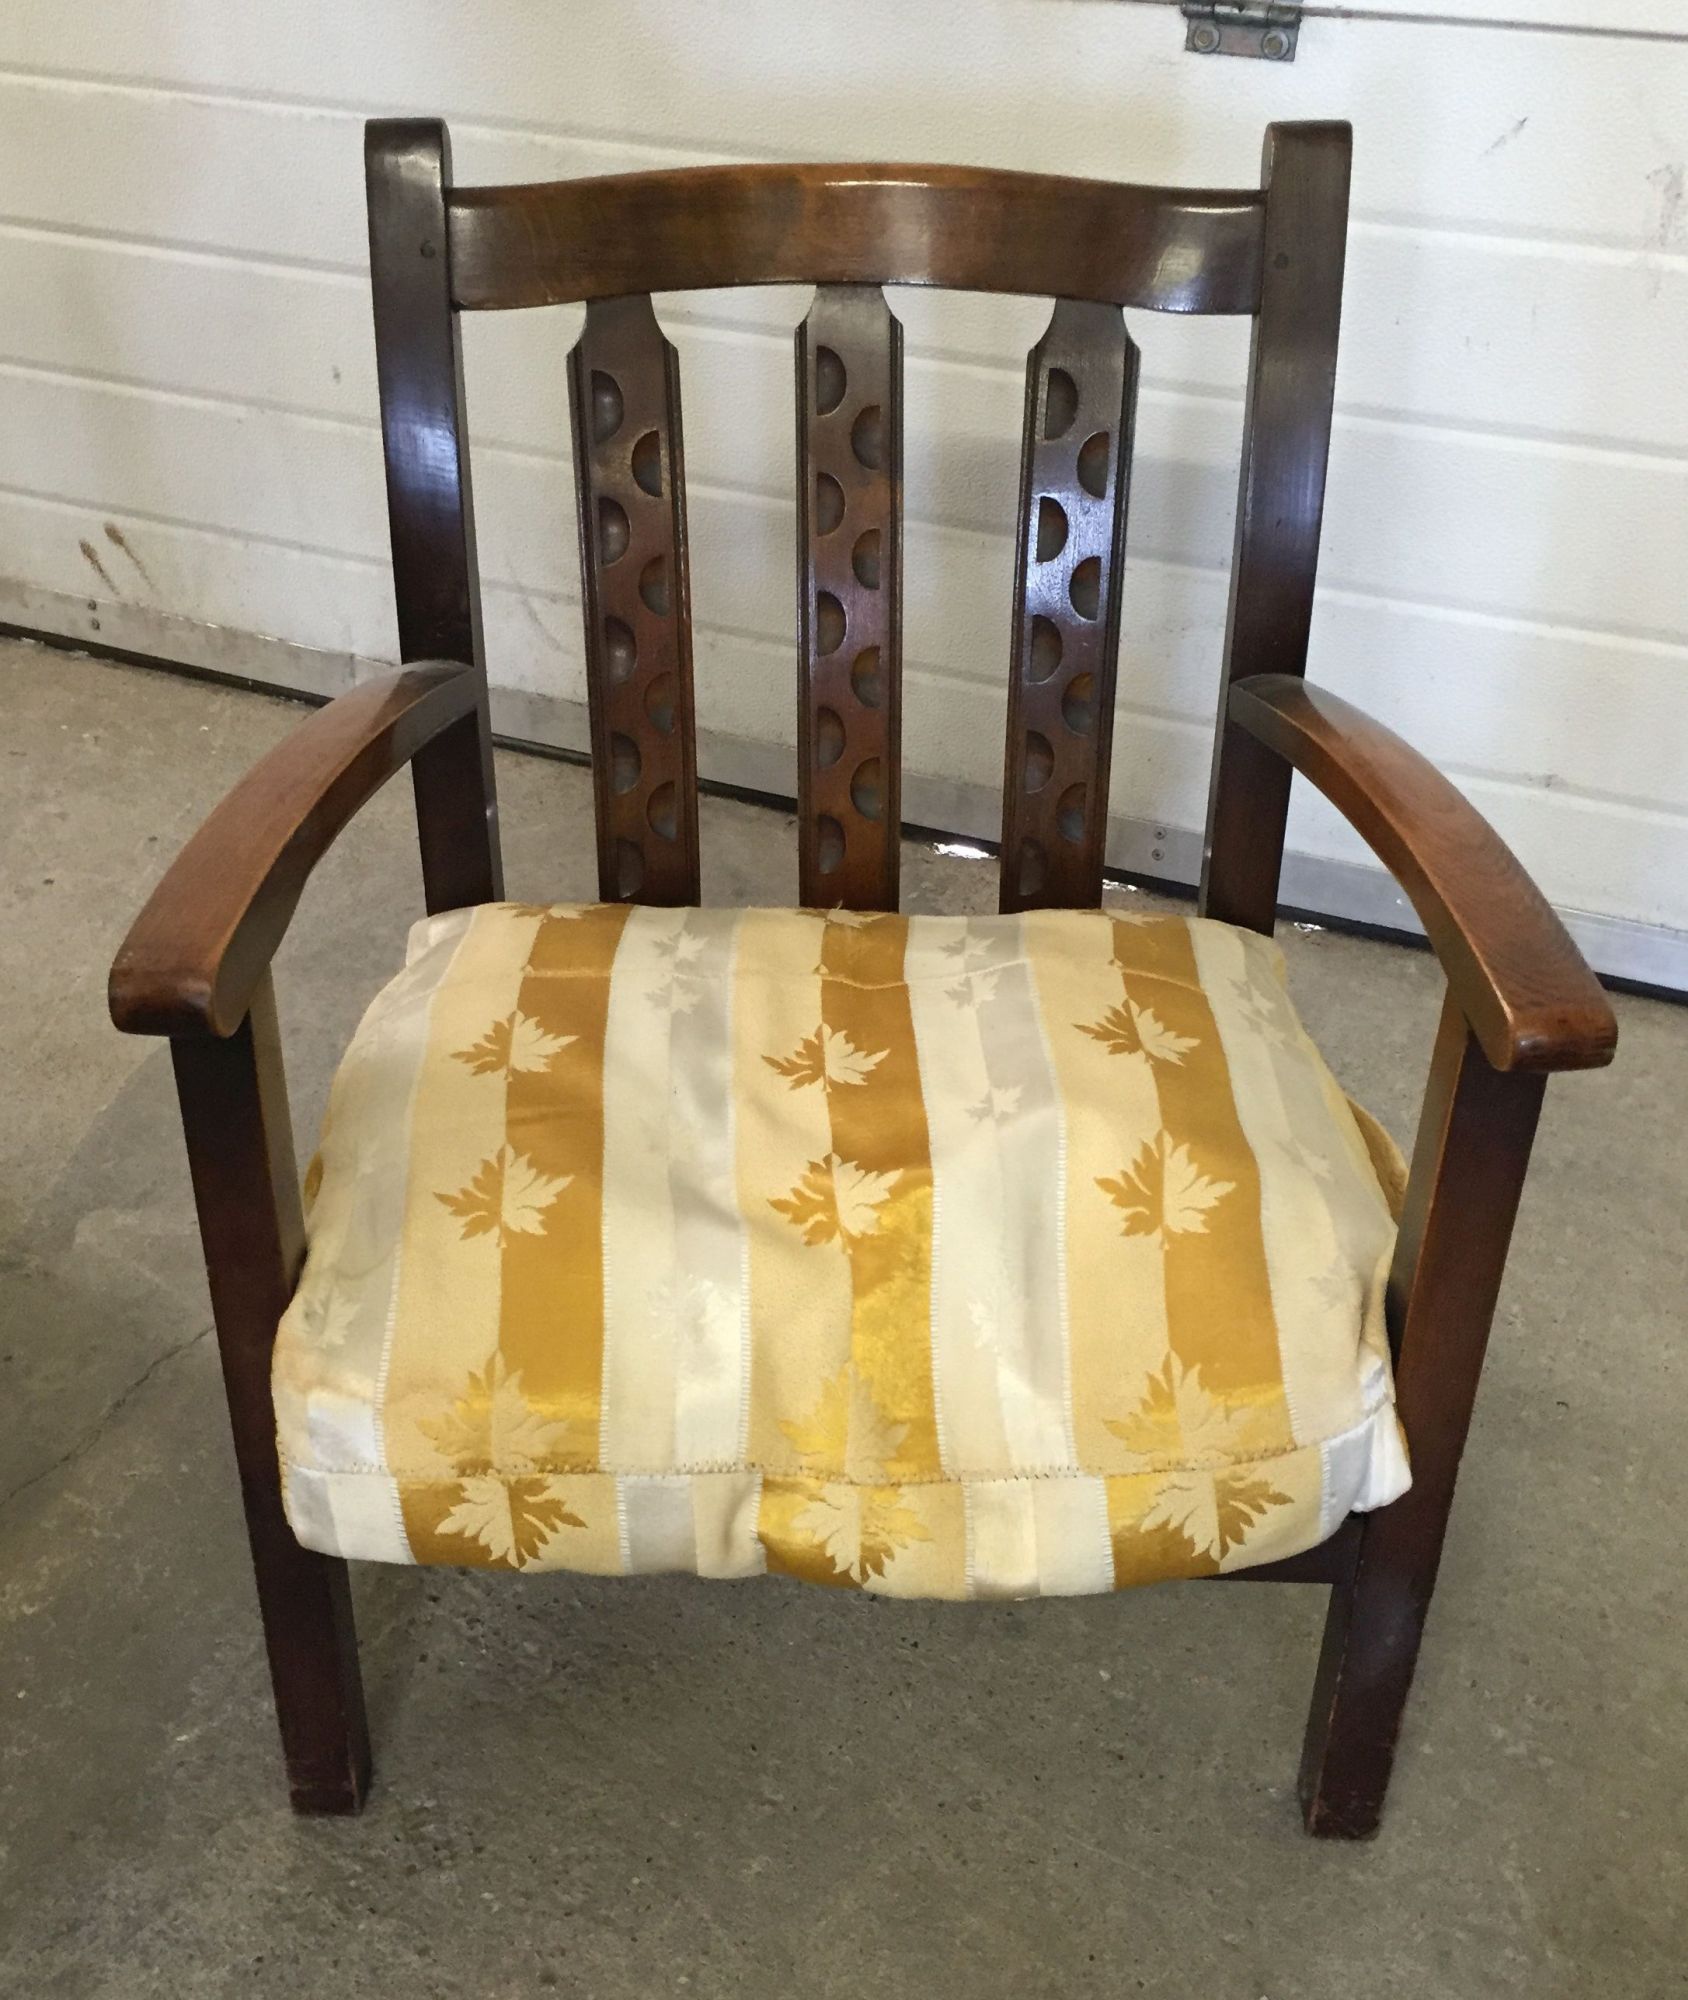 An Arts & Crafts style nursing chair with a gold/cream cushion.